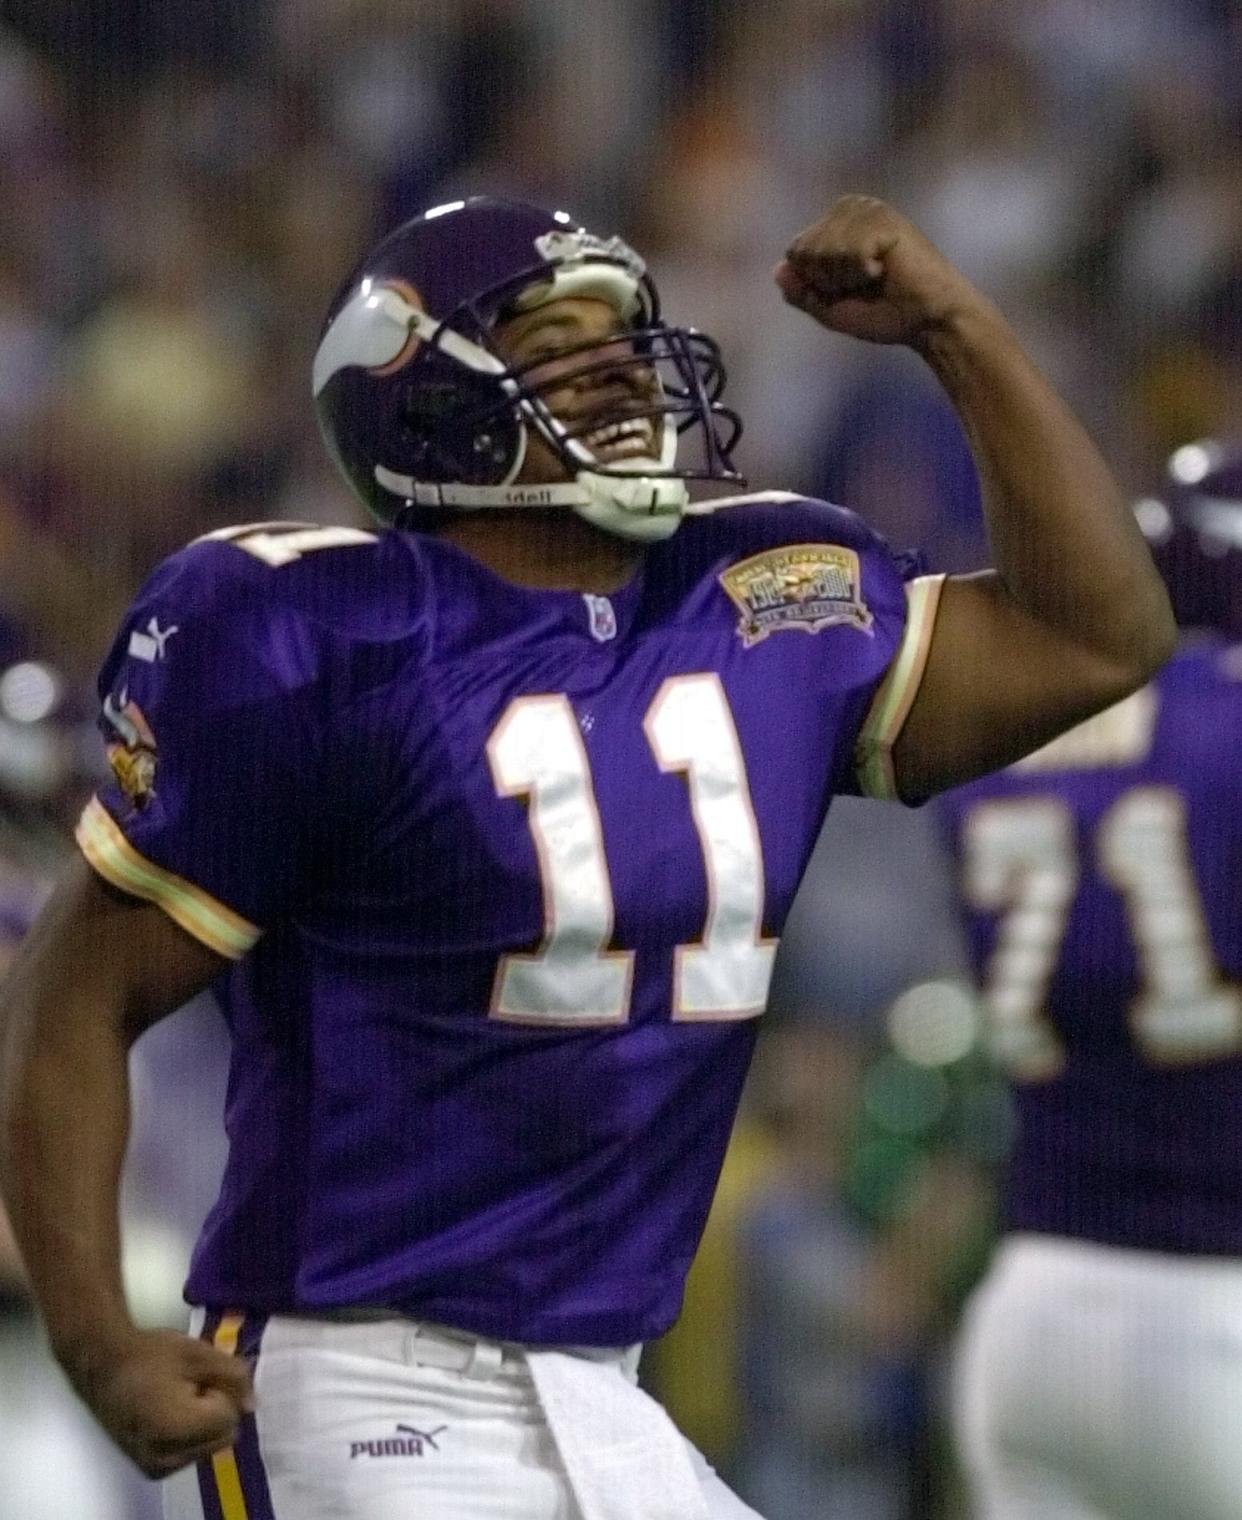 Minnesota Vikings quarterback Daunte Culpepper celebrates his 68-yard touchdown pass to Randy Moss in the third quarter of the Vikings playoff game against the New Orleans Saints Saturday, Jan. 6, 2001, in Minneapolis.